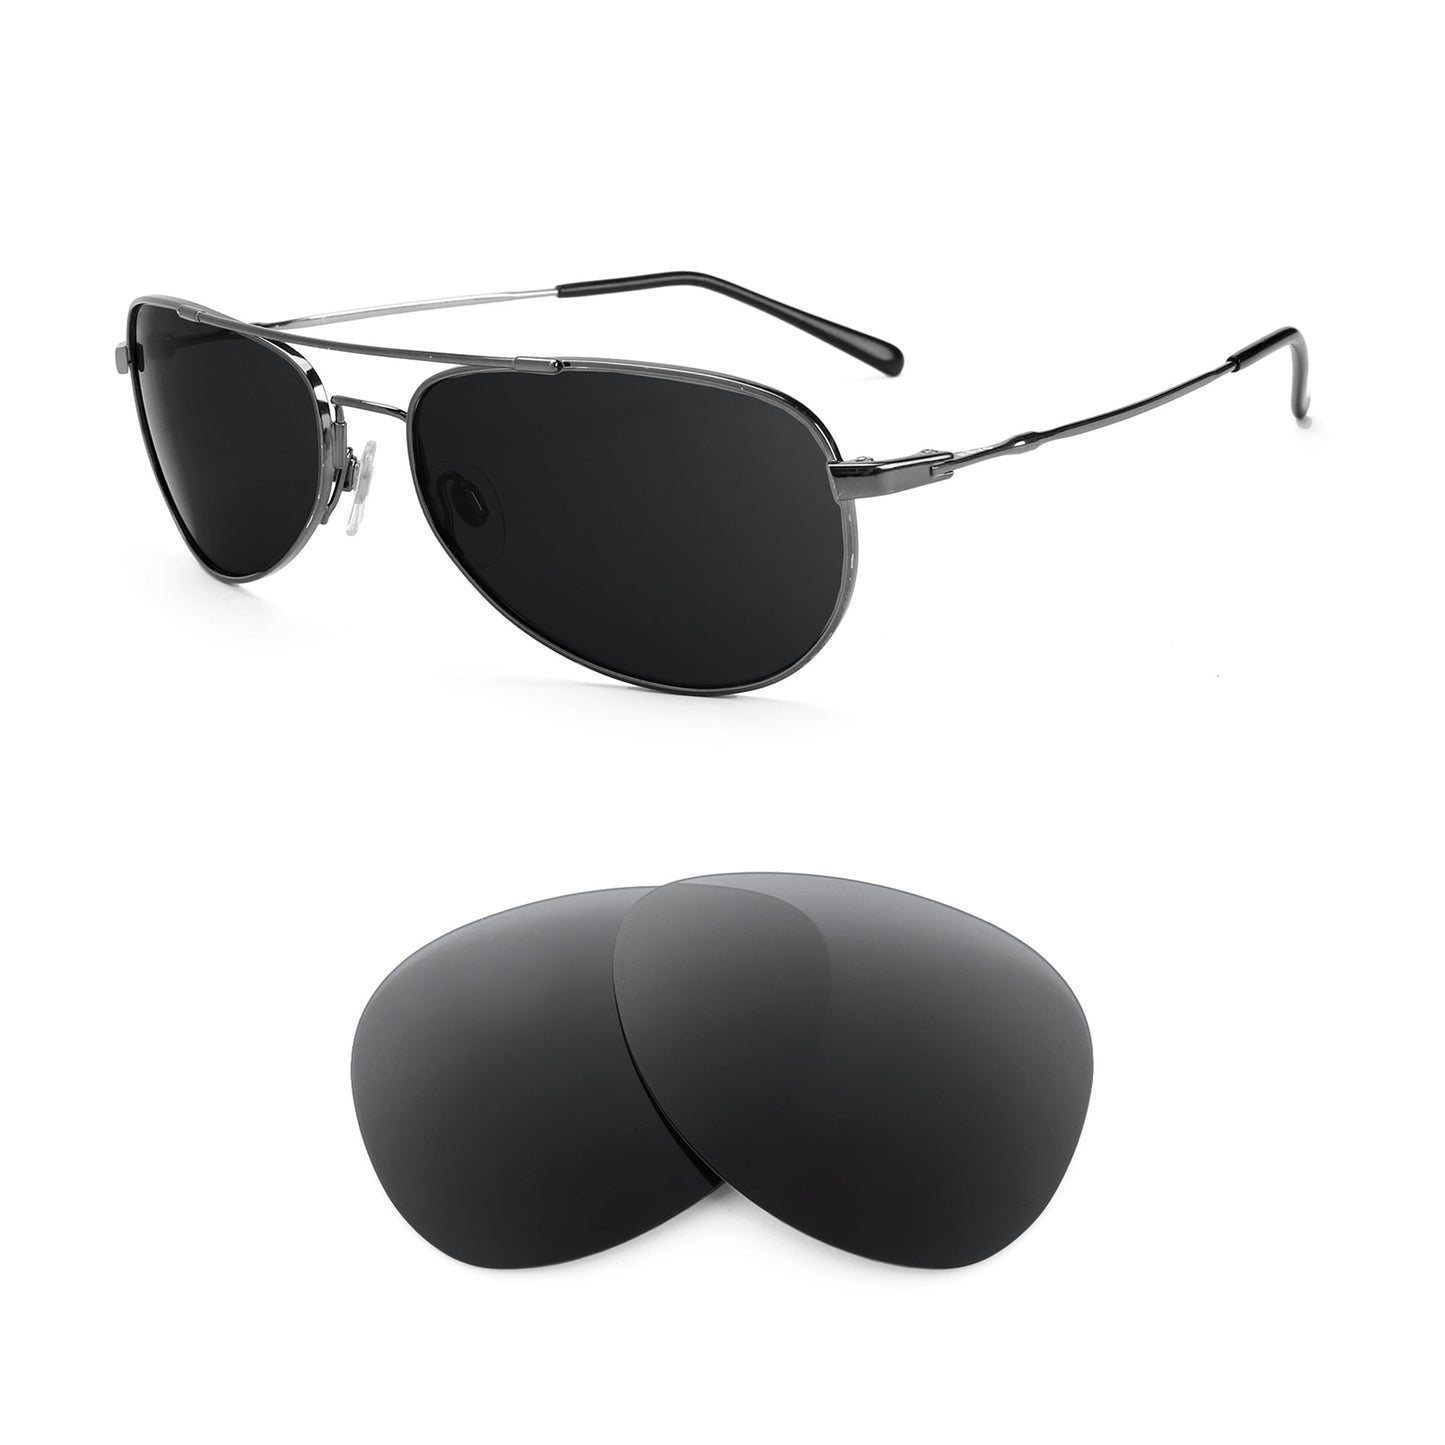 Revo RE9002 sunglasses with replacement lenses